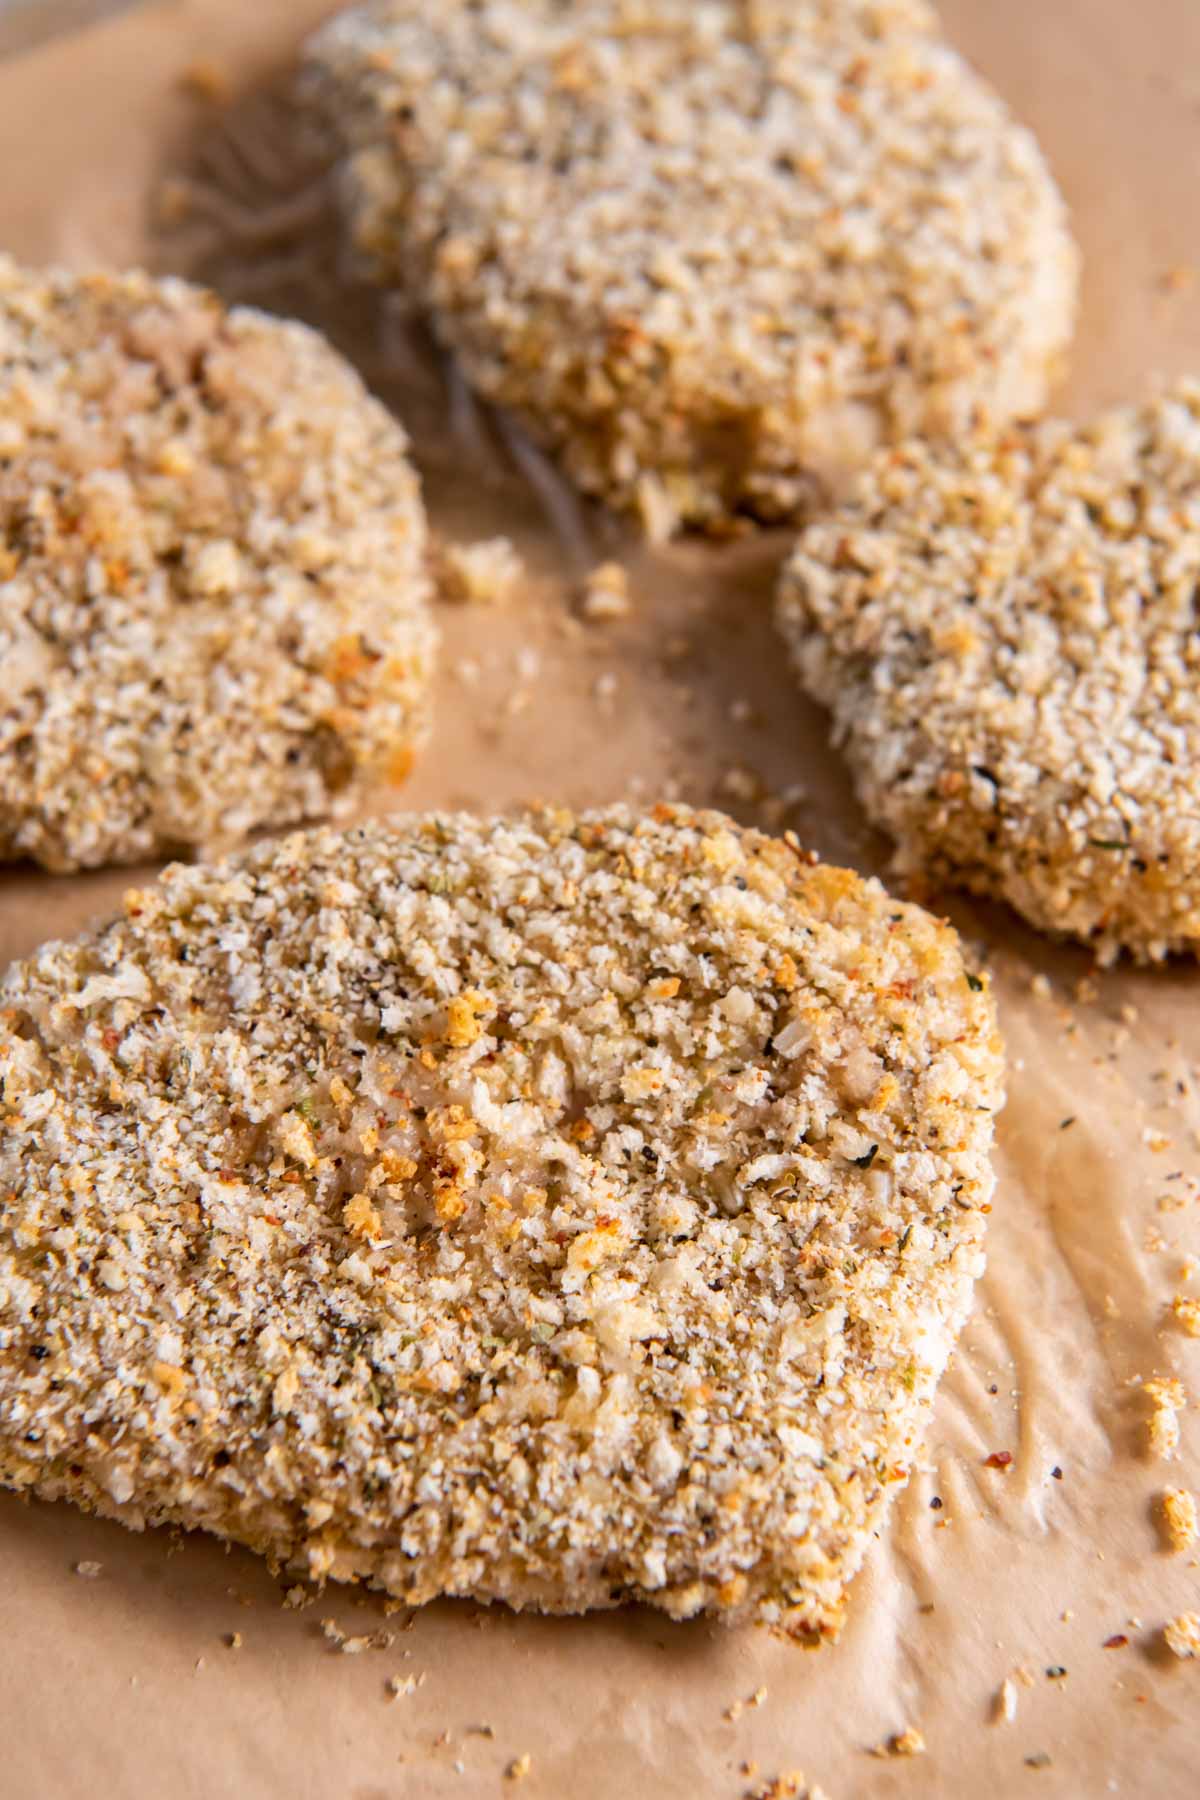 Baked breaded pork chops on parchment paper lined baking sheet.